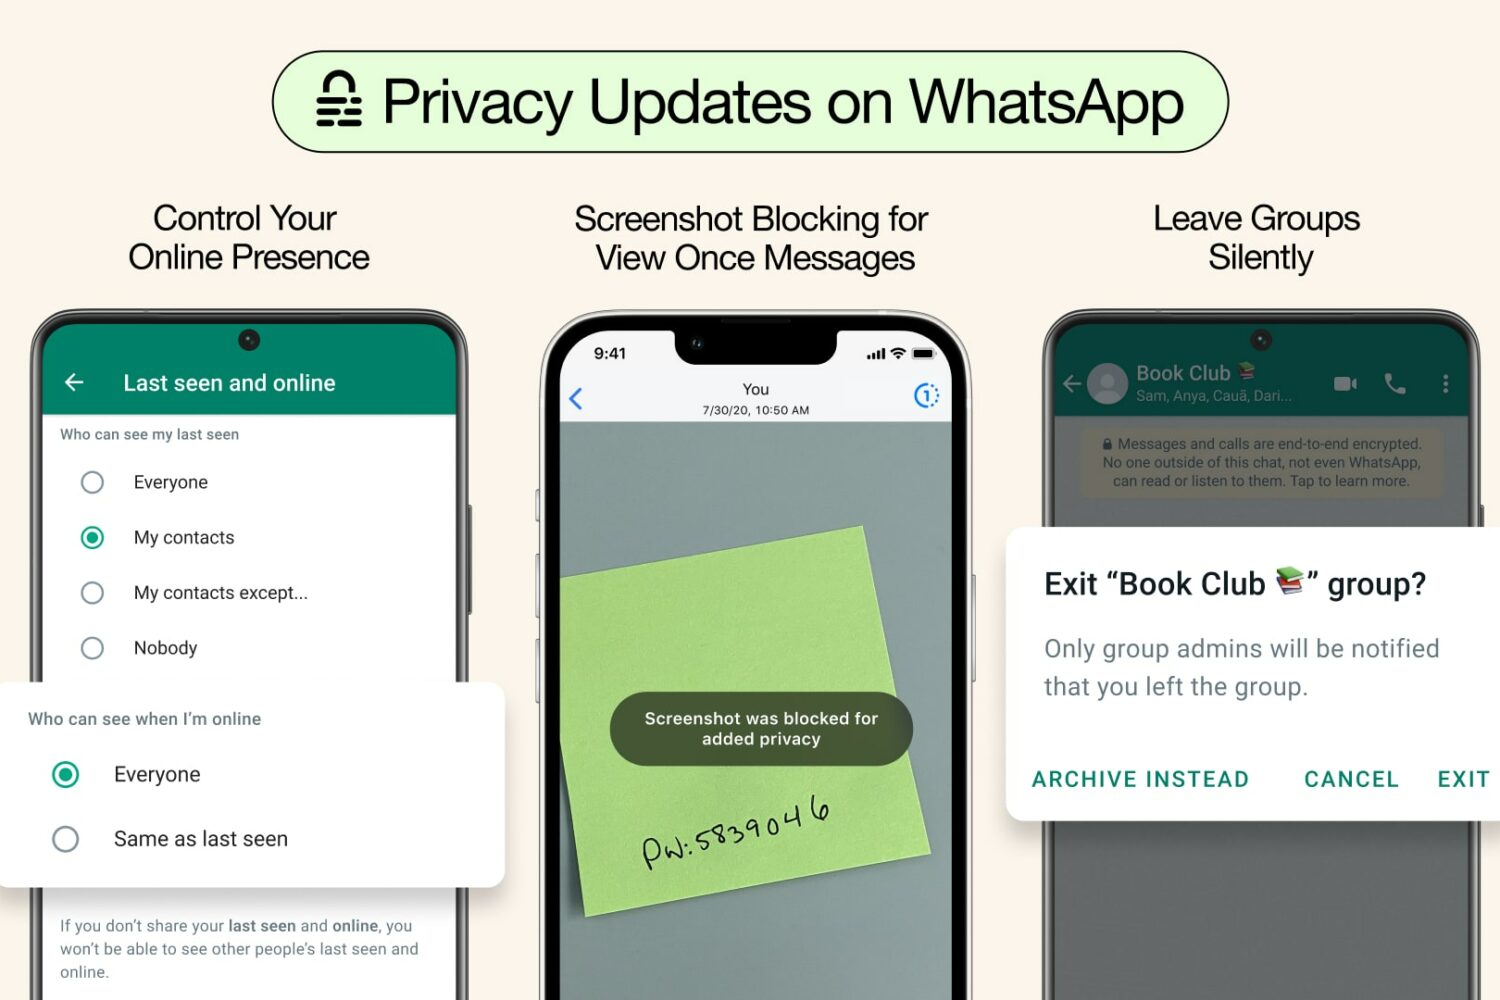 WhatsApp marketing image showcasing new privacy features: Online presence, view-once screenshot blocking and leaving groups without notifying everyone